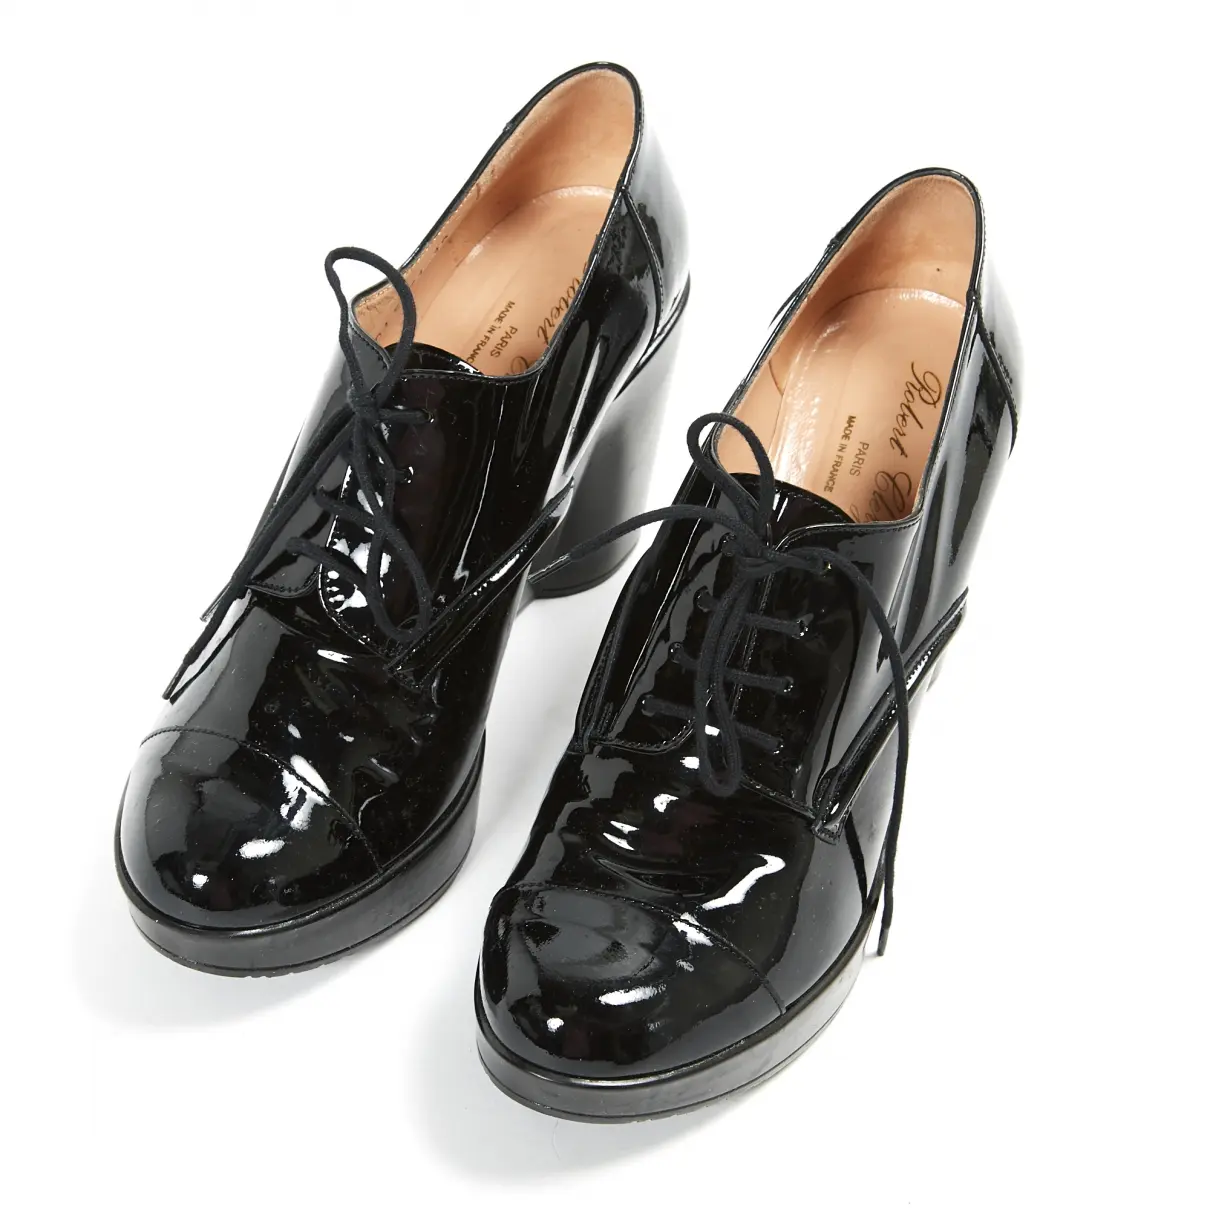 Buy Robert Clergerie Patent leather mules & clogs online